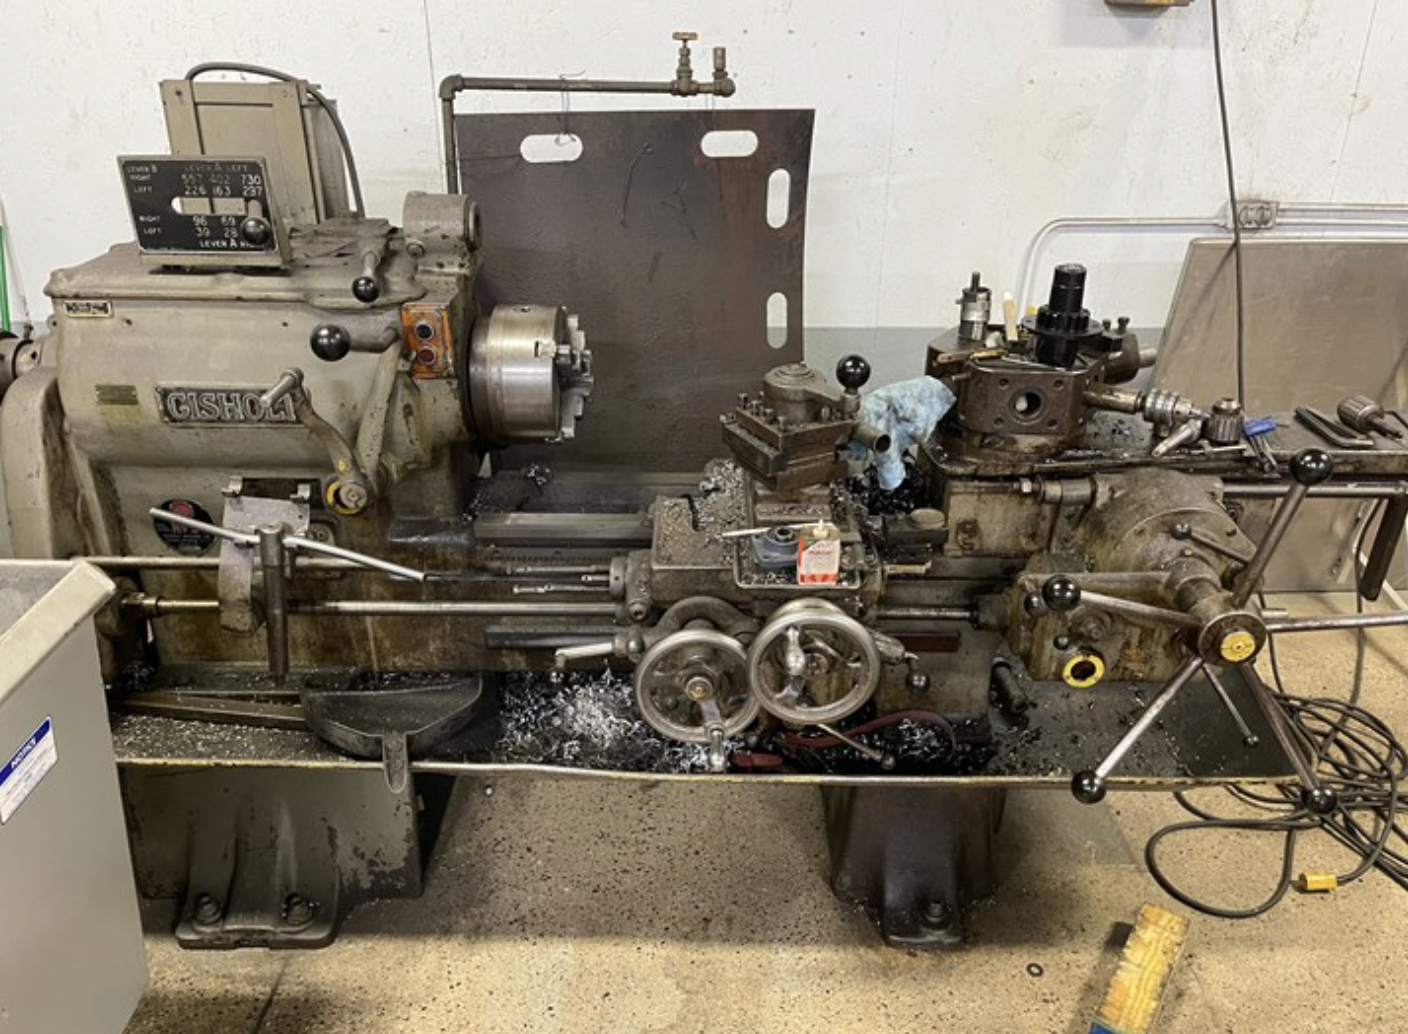 “The shop relies on a 1,200-rpm natural gas generator and a diesel backup generator to heat the 60,000-square-foot building and provide the considerable electricity needed to power 30 CNC machine tools,” per Modern Machine Shop.